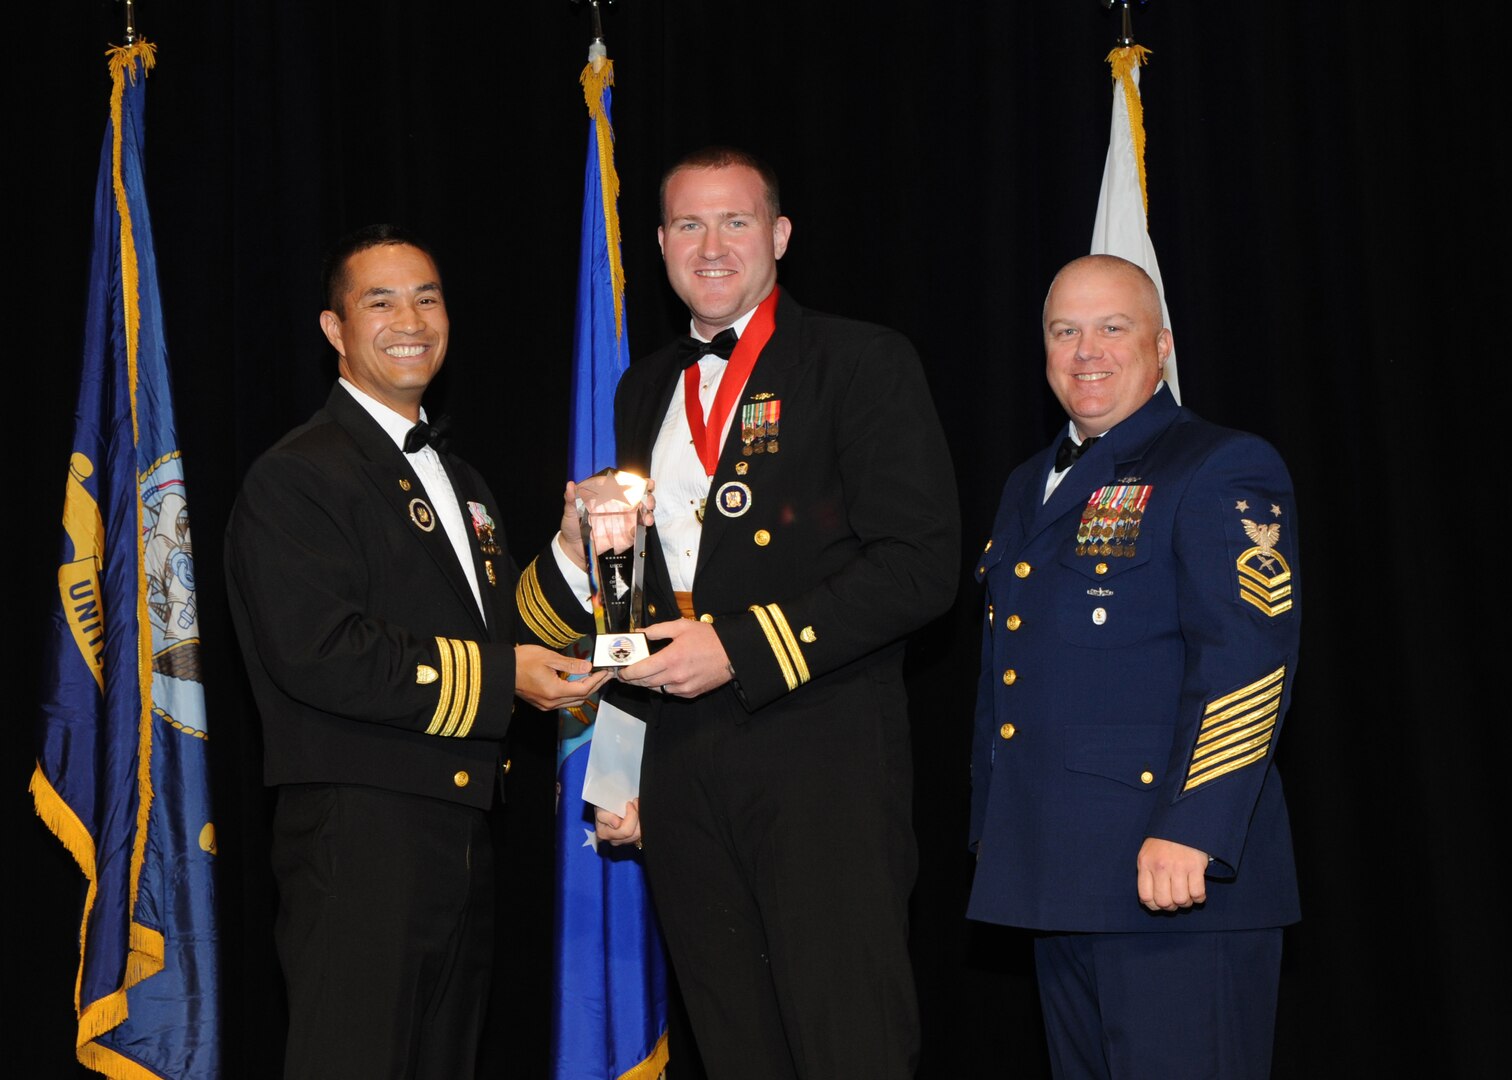 Representing the Coast Guard for award presentations during the Joint Base San Antonio Annual Awards Banquet March 29 are Commander Gene Anzano, left, and Master Chief Intelligence Specialist Alan Paul, right. Petty Officer 1st Class Joseph Gribbins, center, from the Coast Guard Recruiting Office San Antonio, received the NCO of the Year Award. (U.S. Air Force photo by Melissa Peterson)